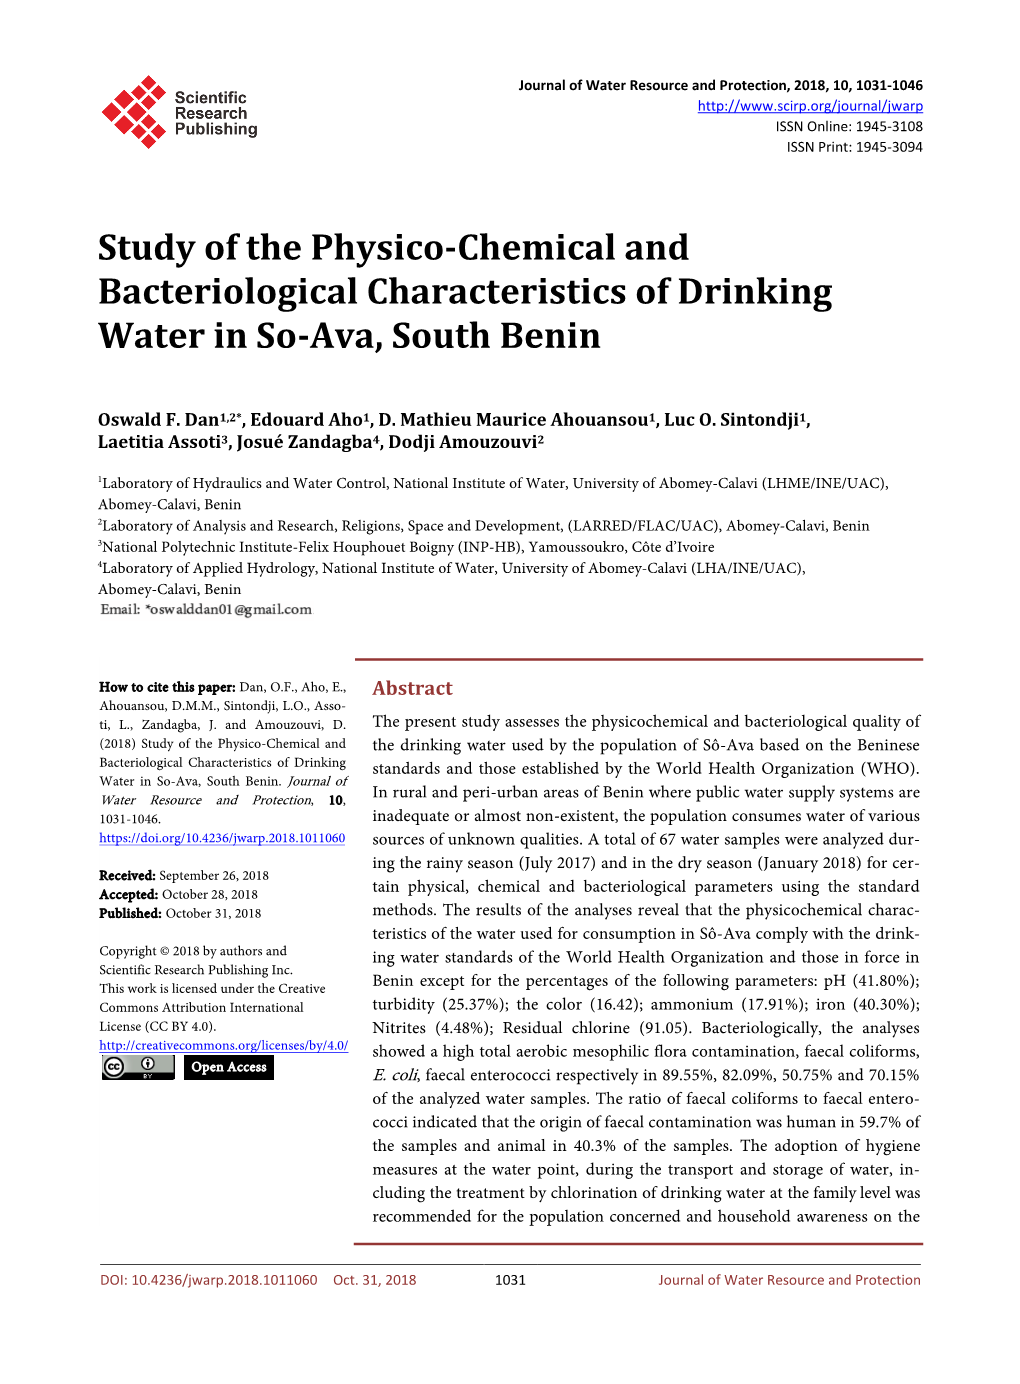 Study of the Physico-Chemical and Bacteriological Characteristics of Drinking Water in So-Ava, South Benin